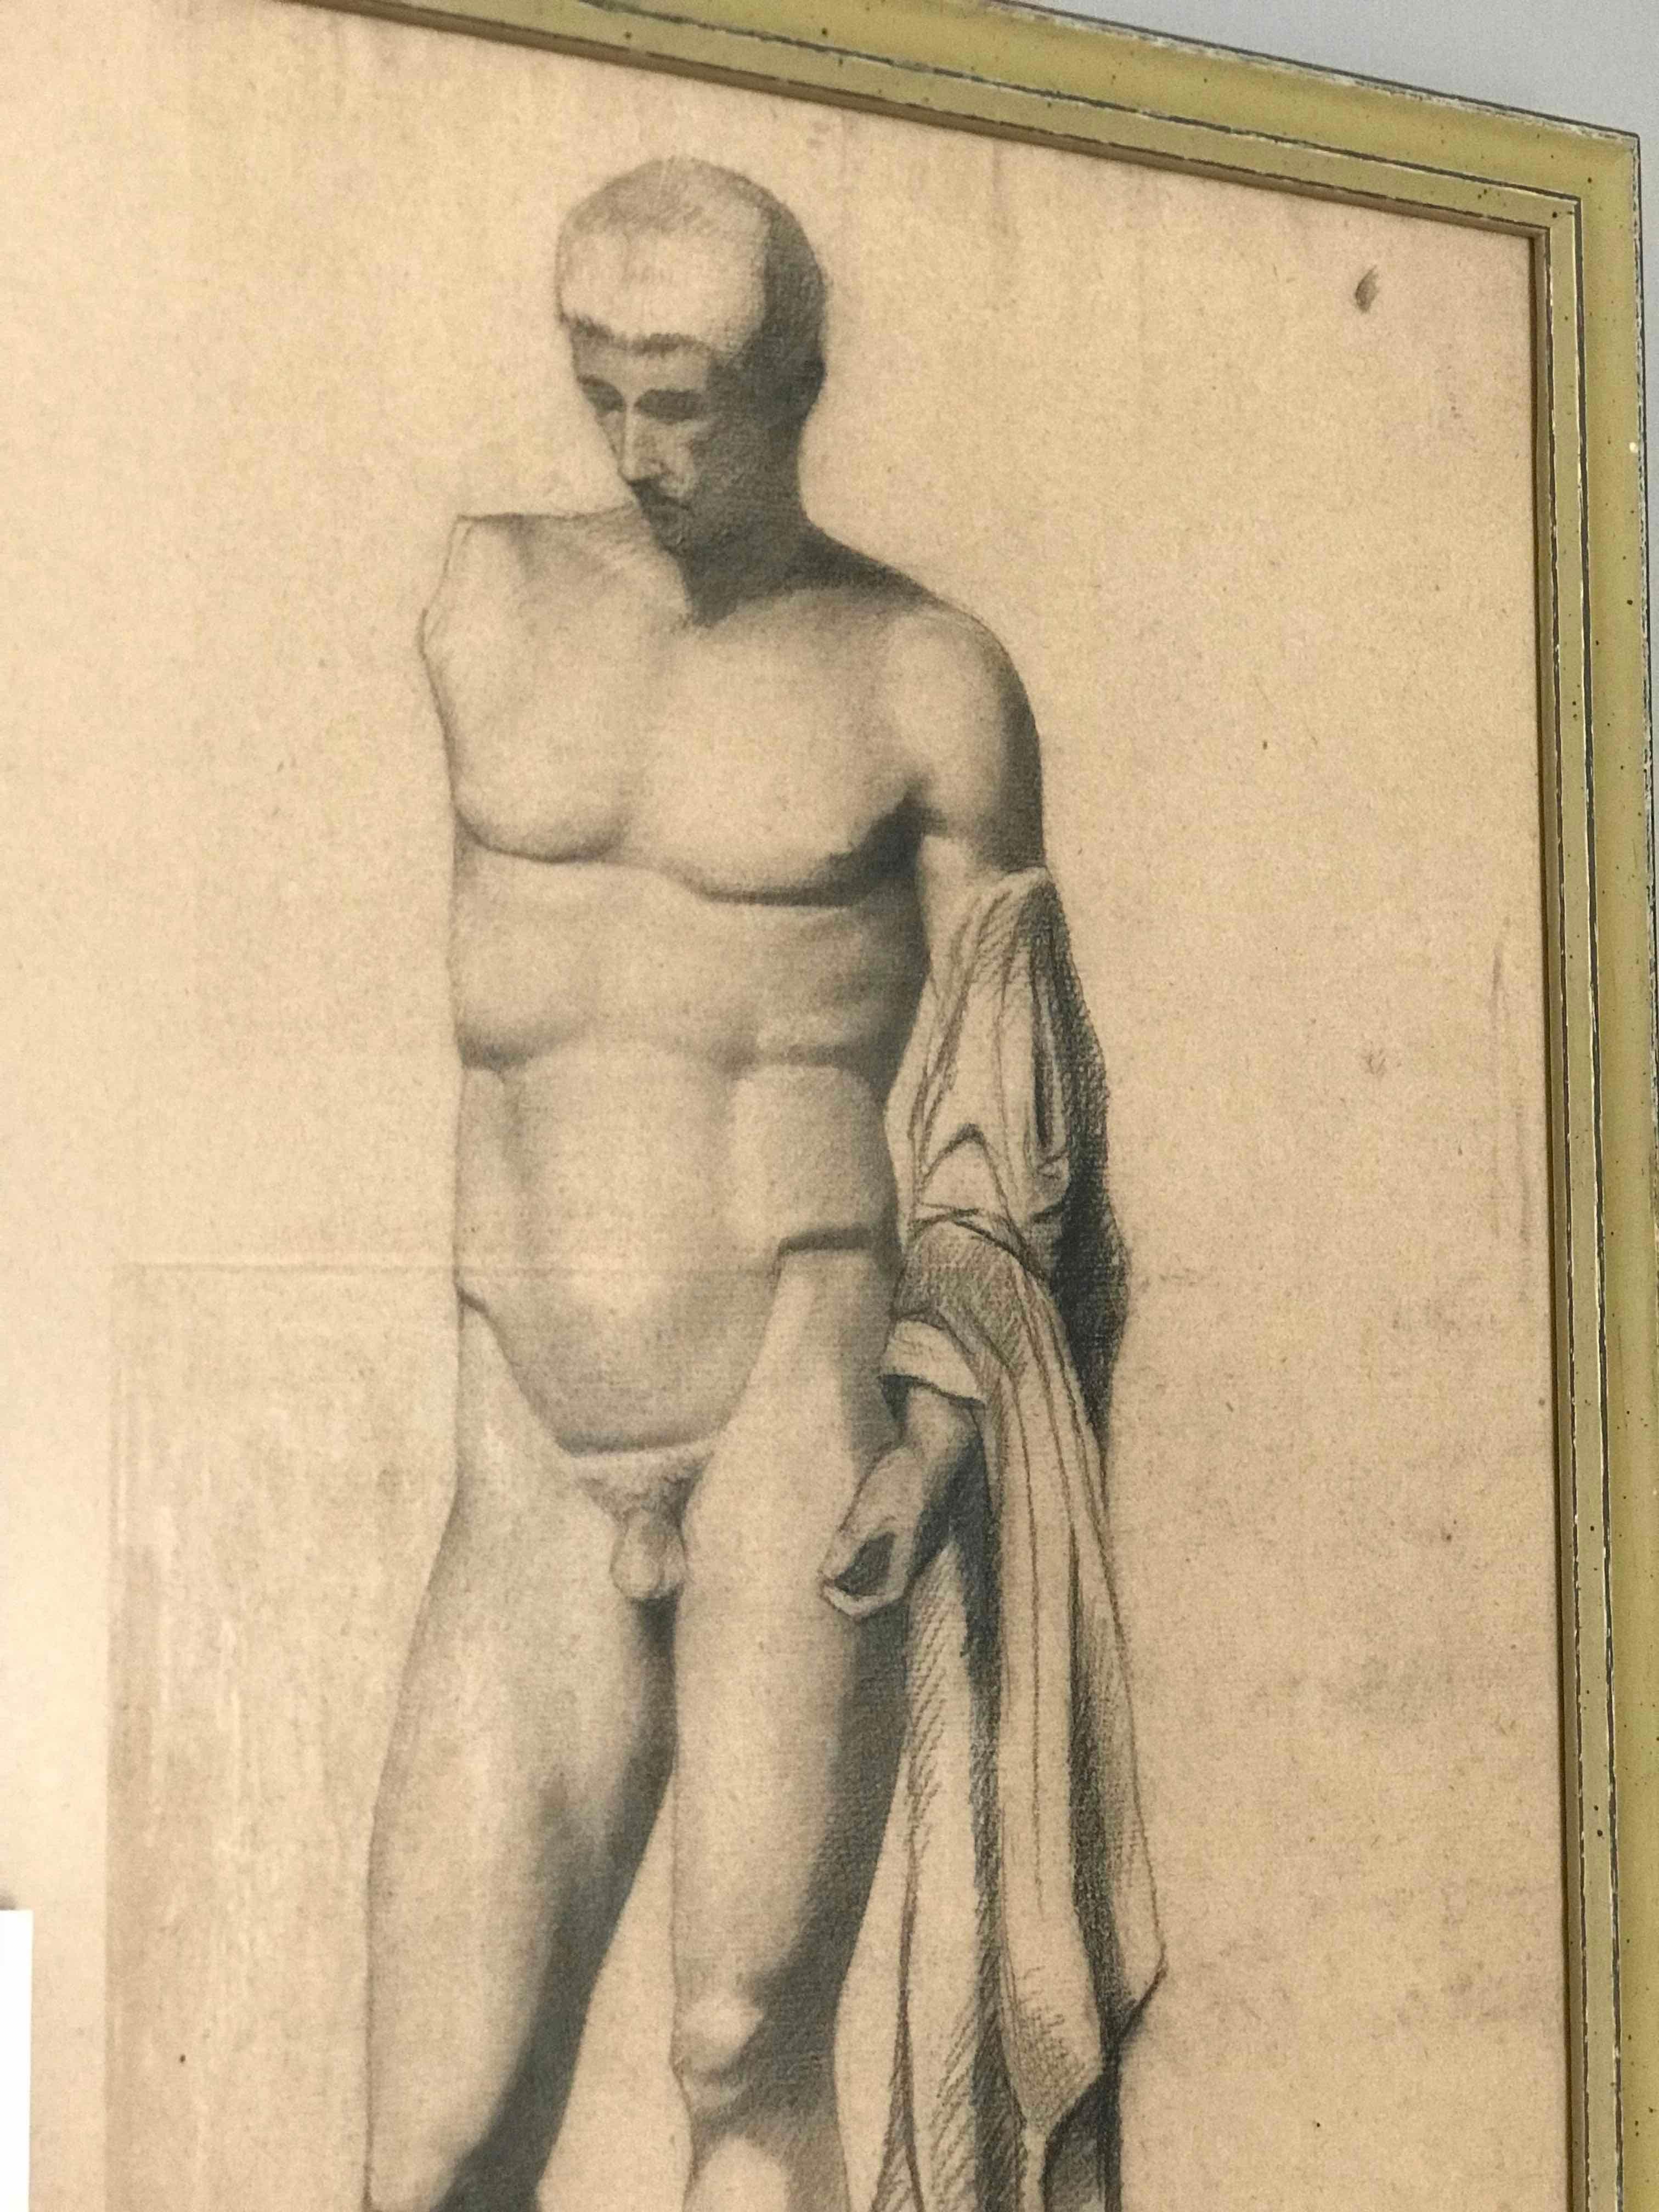 Pair of late 19th-century neoclassical charcoal drawings of a Greek or Roman nude male sculpture in the French Academy style. Not unlike Michelangelo's famous David, the finely built figure gazes into another world, his stance, an exquisitely